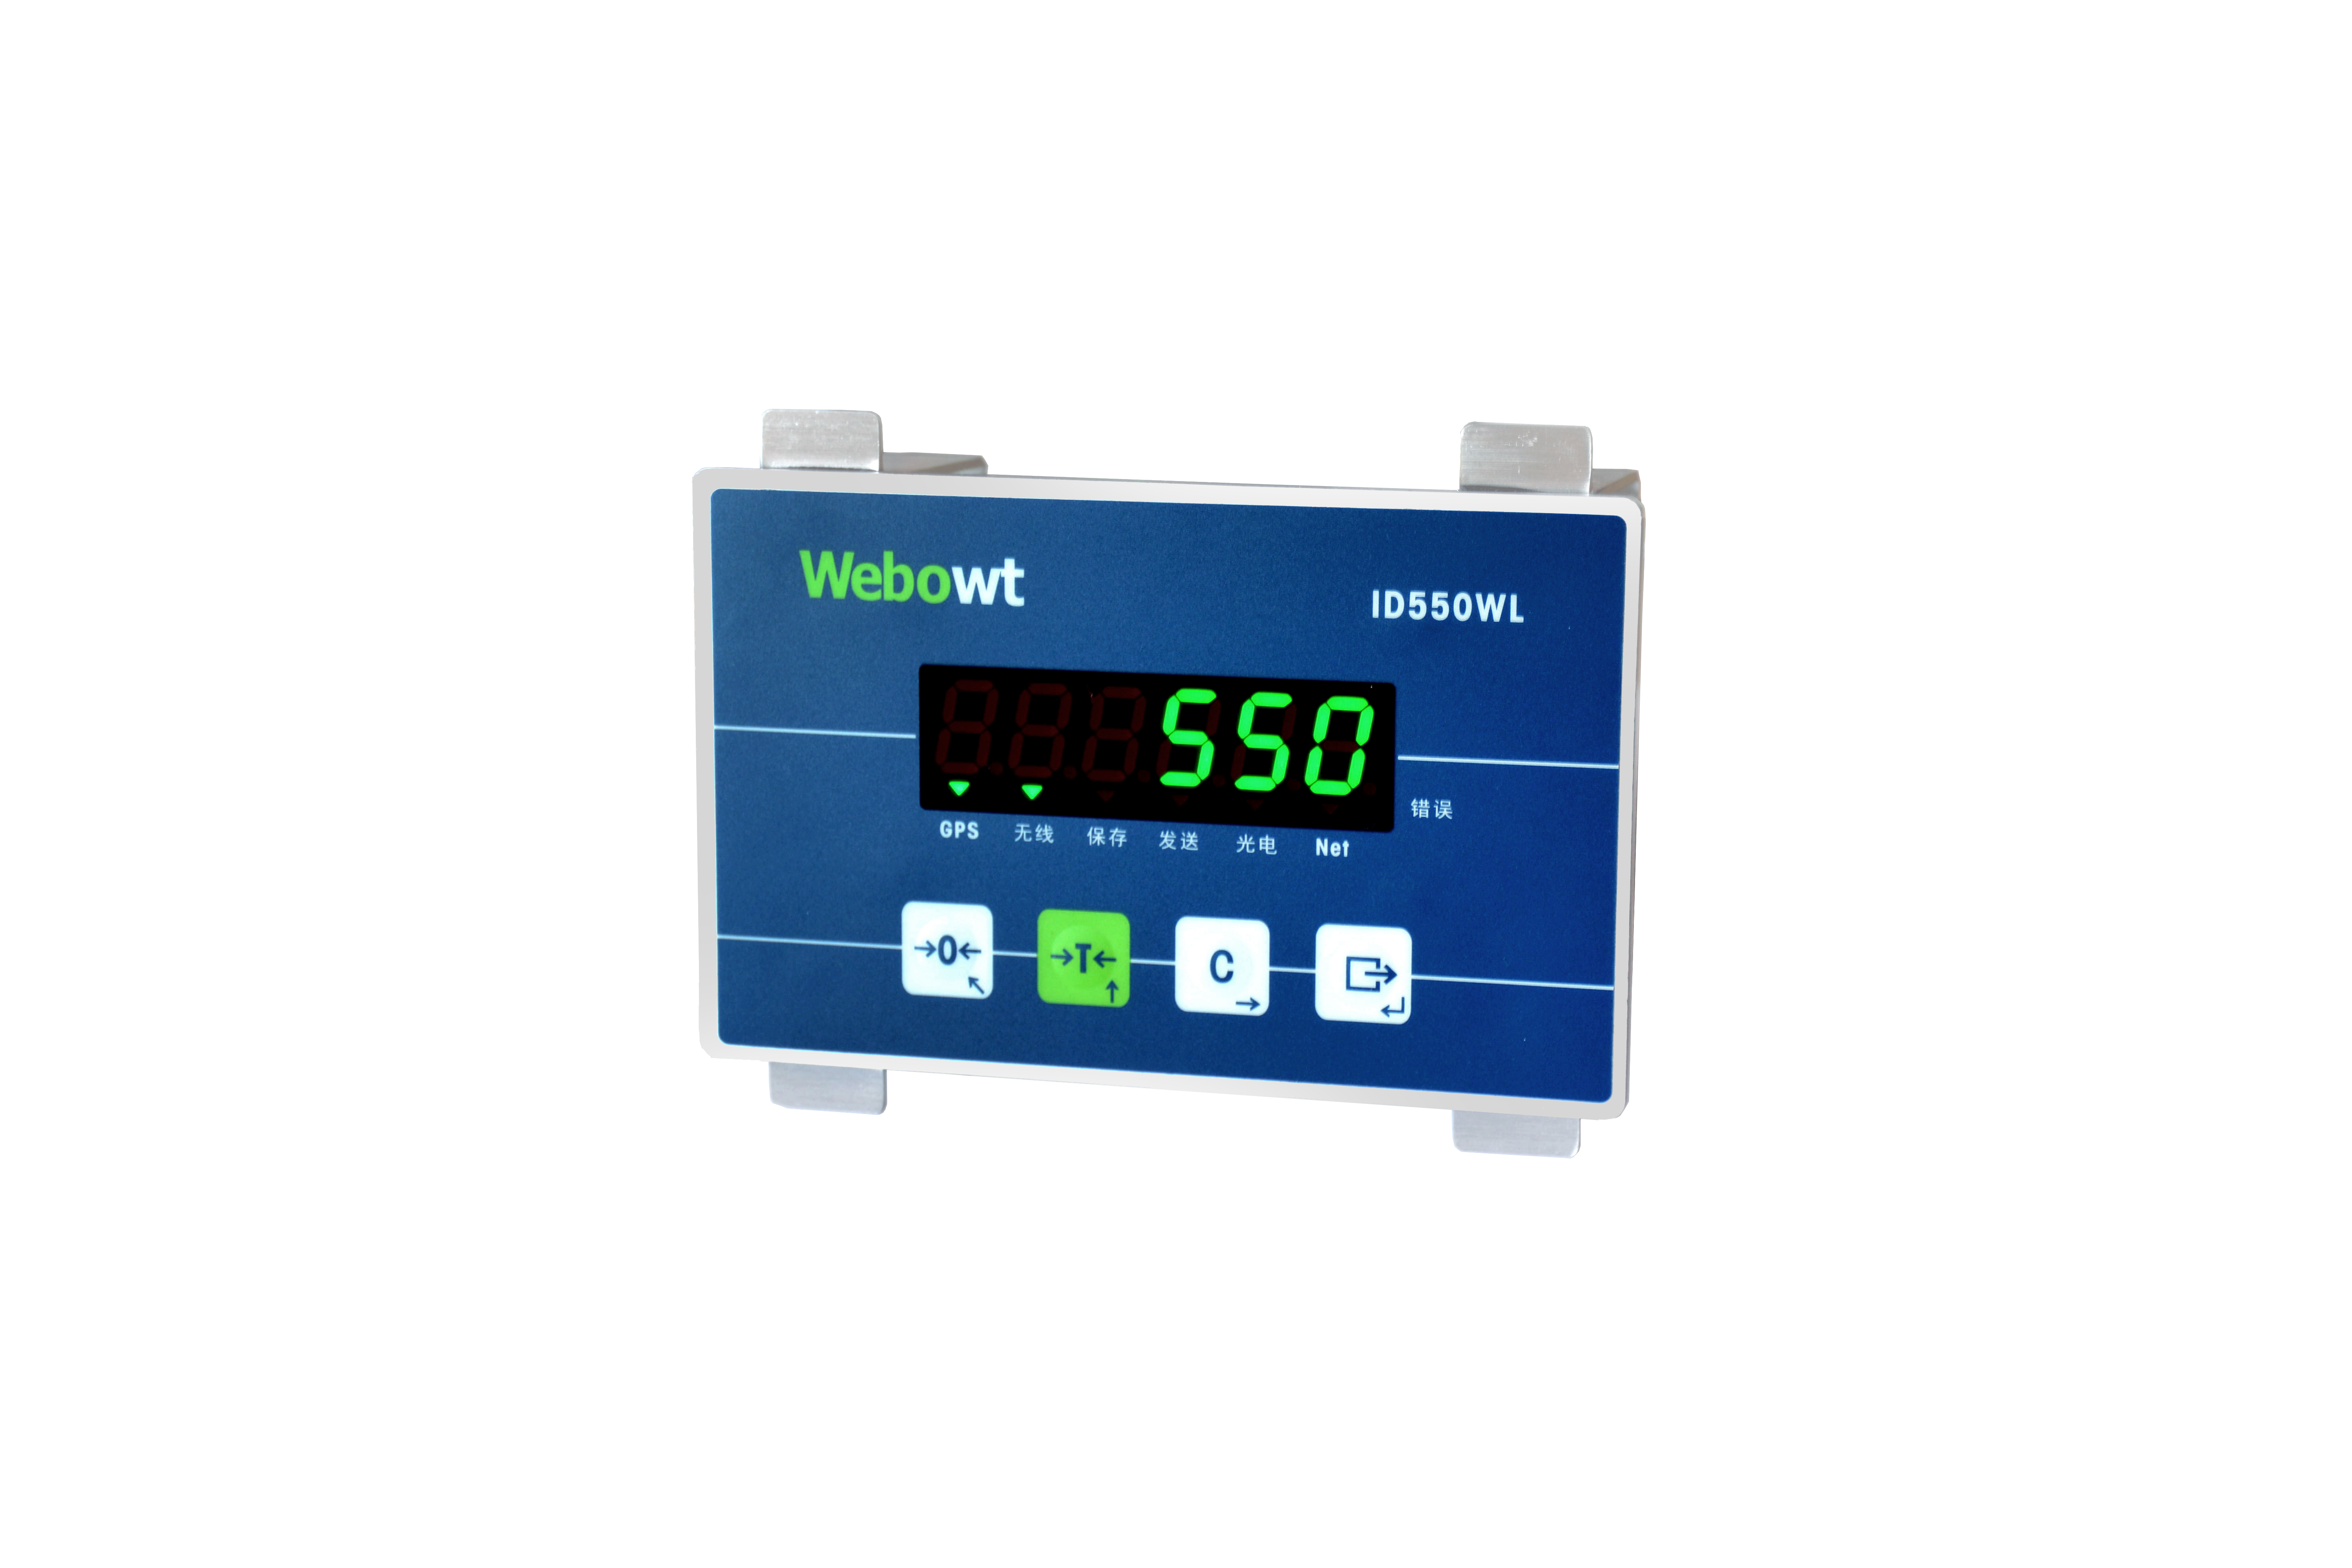 Order No. 855WL04, Model No.:ID550WLA11110D, ID550WL, Panel, Input x 1/ Output x 2, GPS, 2G, Silo Tank Weighing, with ABS enclosure, 220VAC, built-in power switch